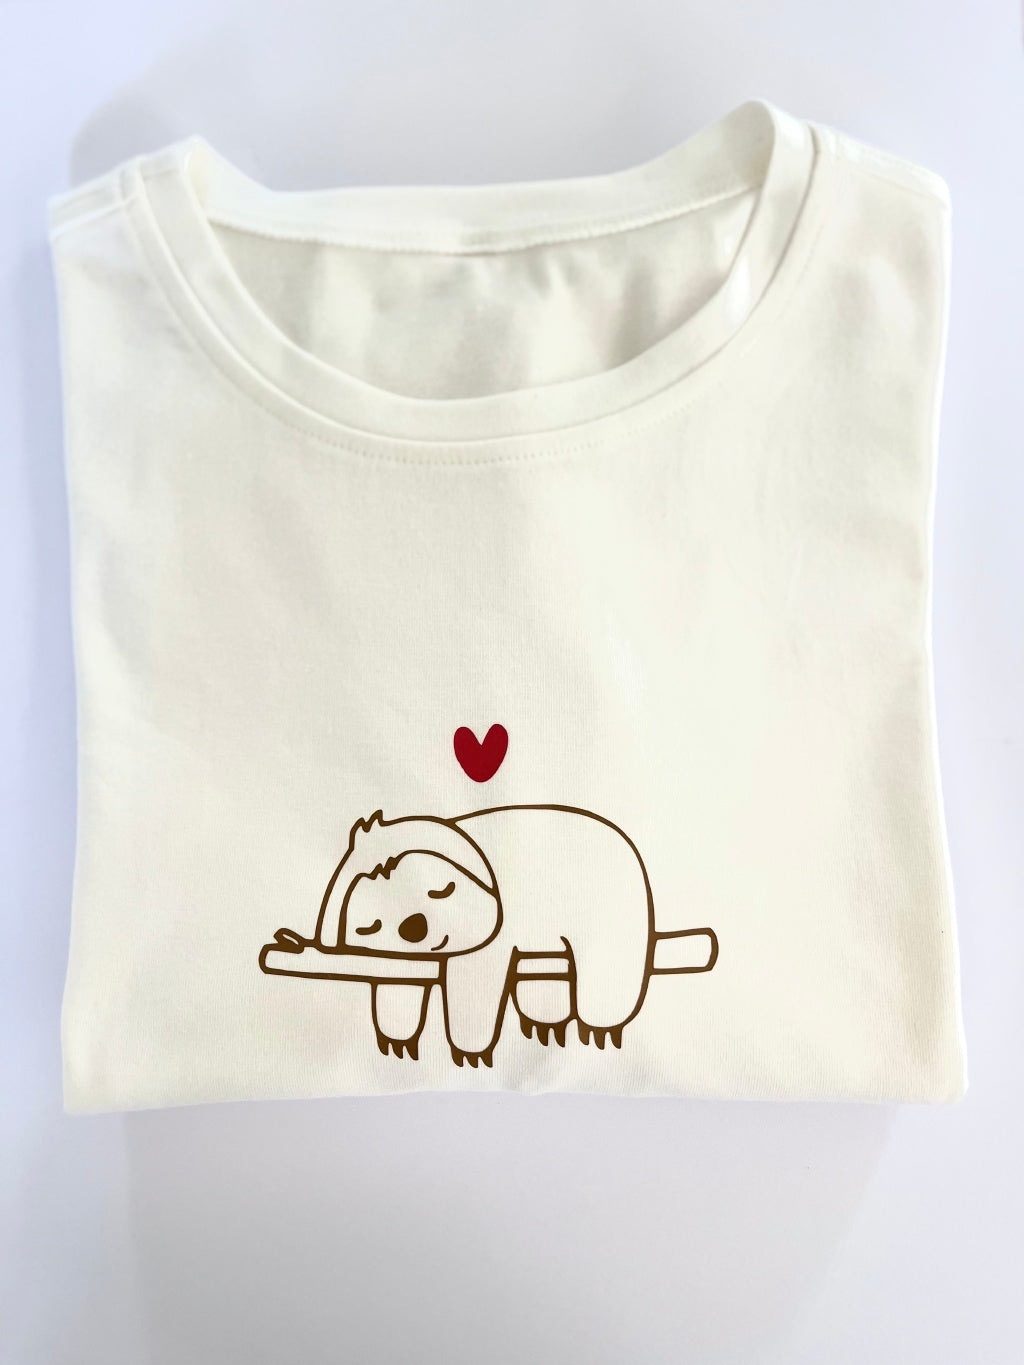 Big unisex t-shirt made of cotton (cute sloth with a hart)